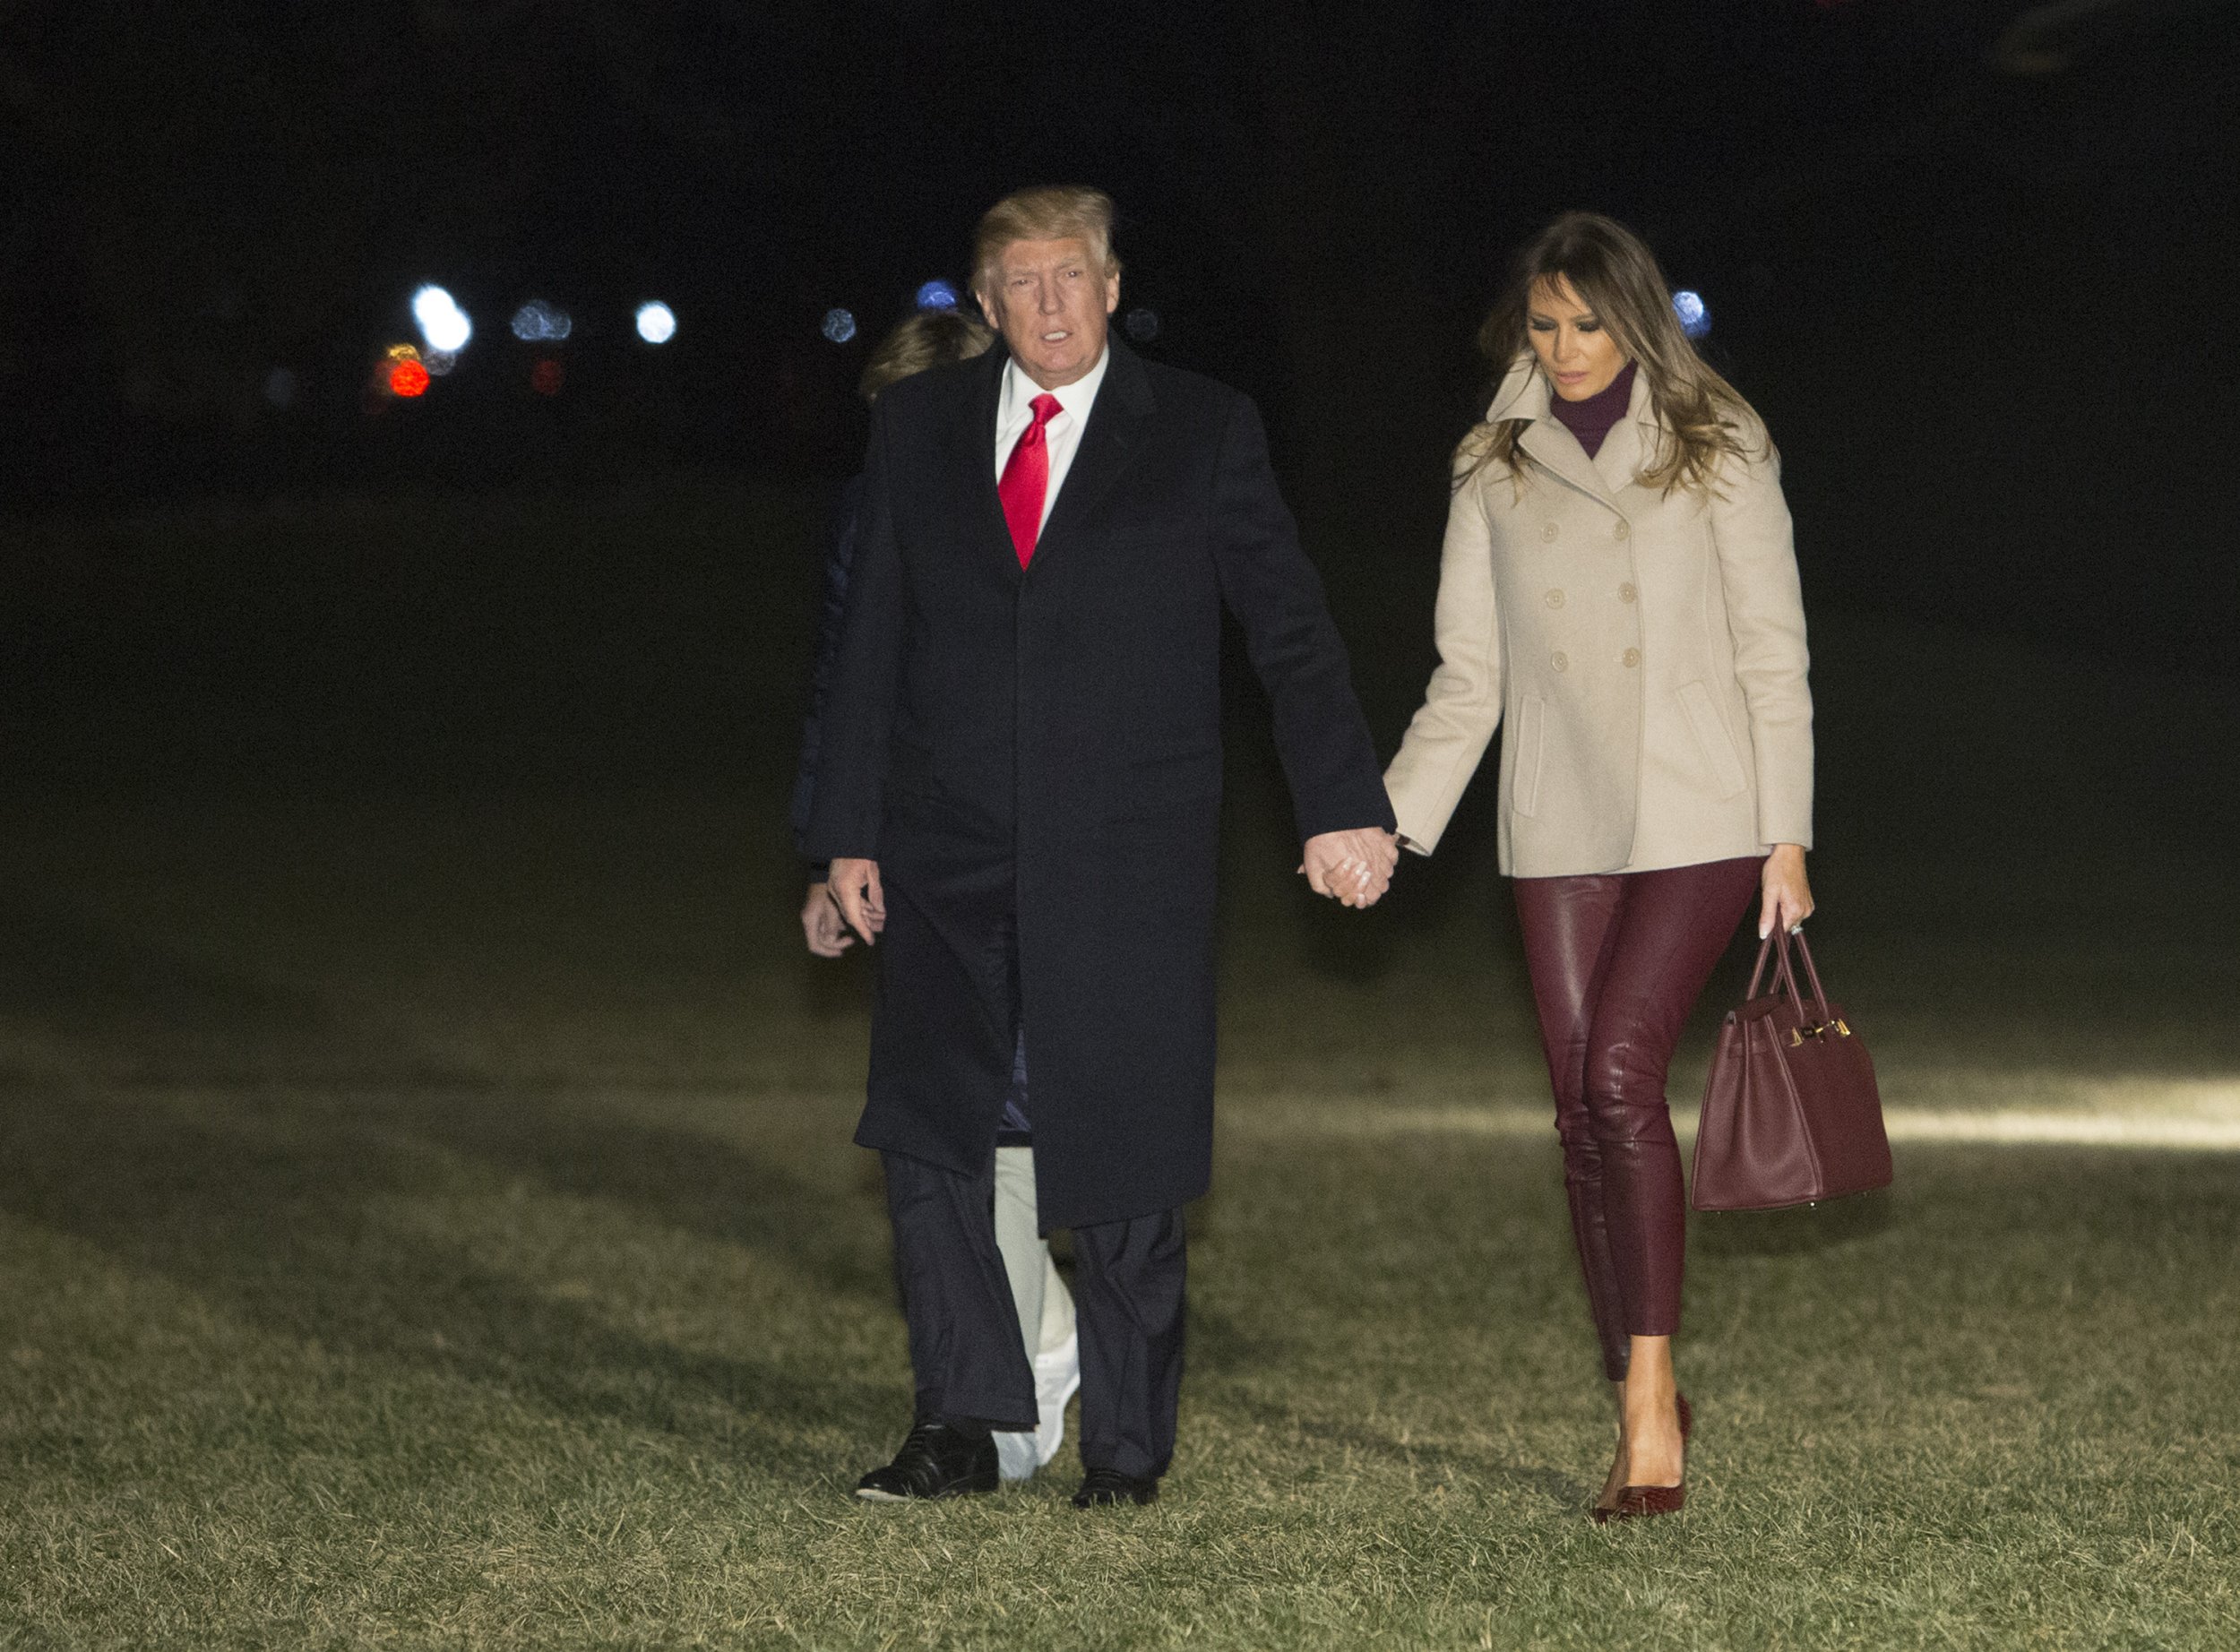 Donald Trump called Melania Trump a "trophy wife," book claims